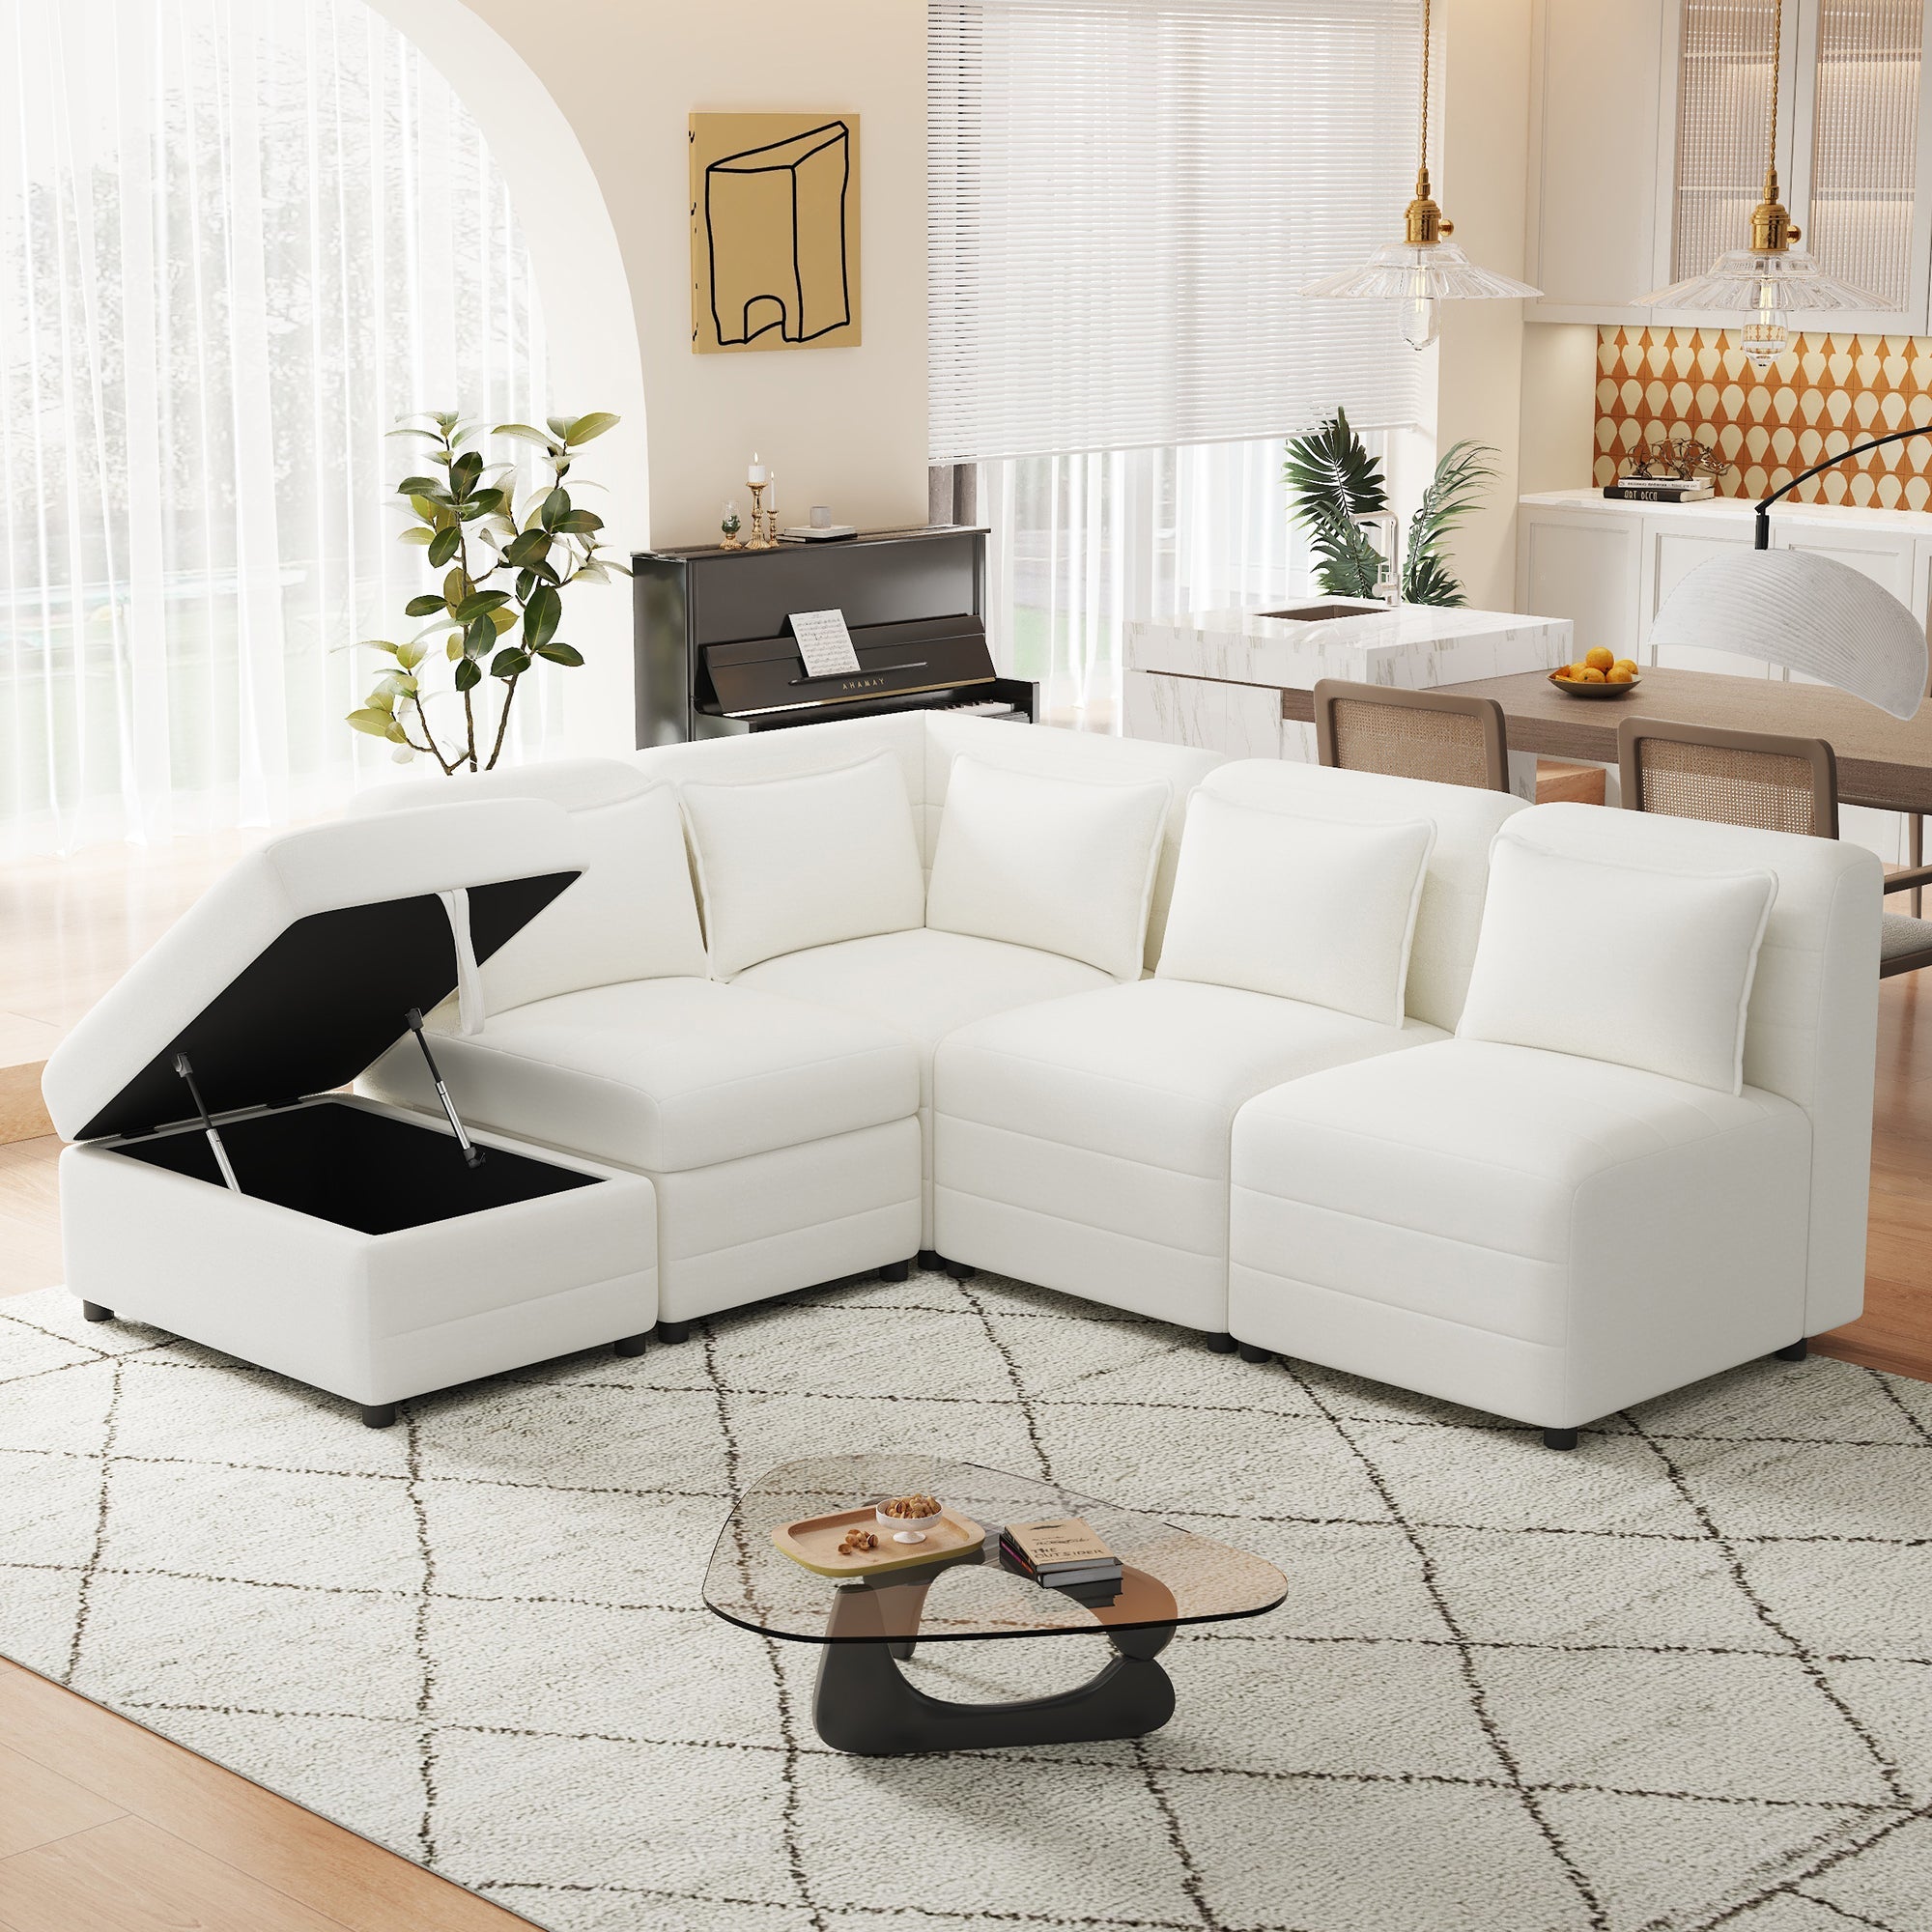 Free-Combined Sectional Sofa 5-seater Modular Couches with Storage - 8e65cf82d835407f89bf56ac50066478